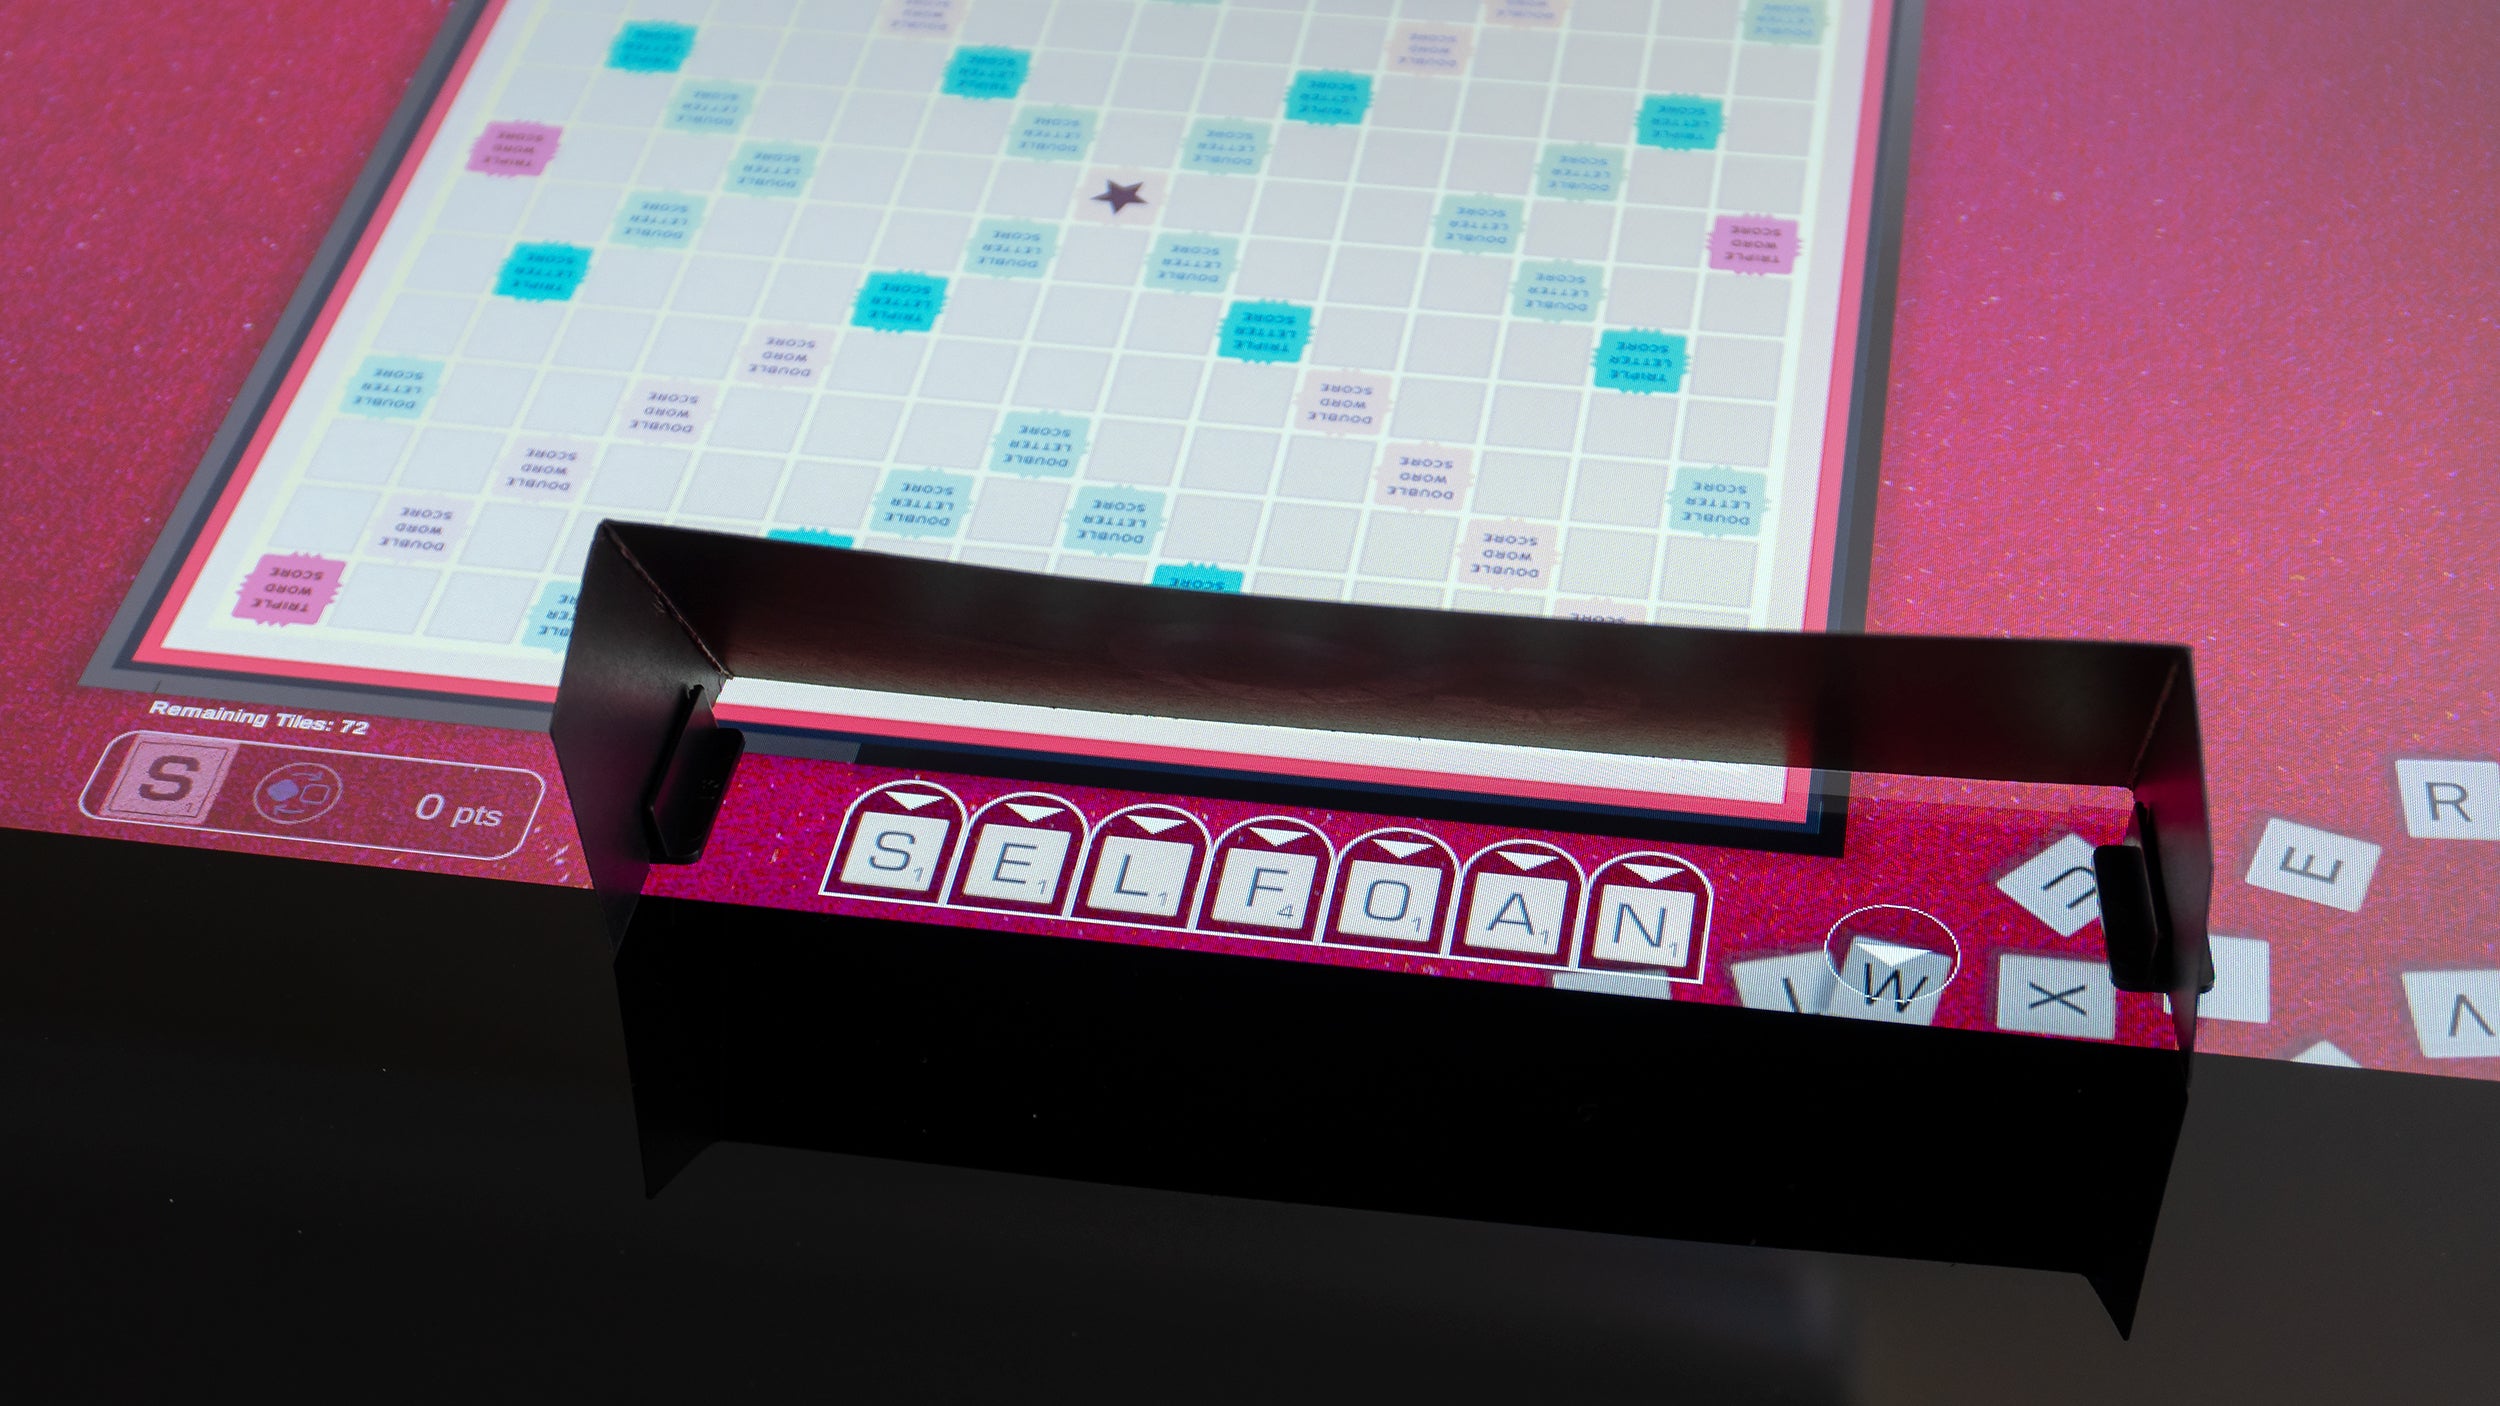 Some games don't translate to a giant touchscreen as well as others. Scrabble requires players to use a physical shield to keep their letter tiles hidden from other players. (Photo: Andrew Liszewski - Gizmodo)